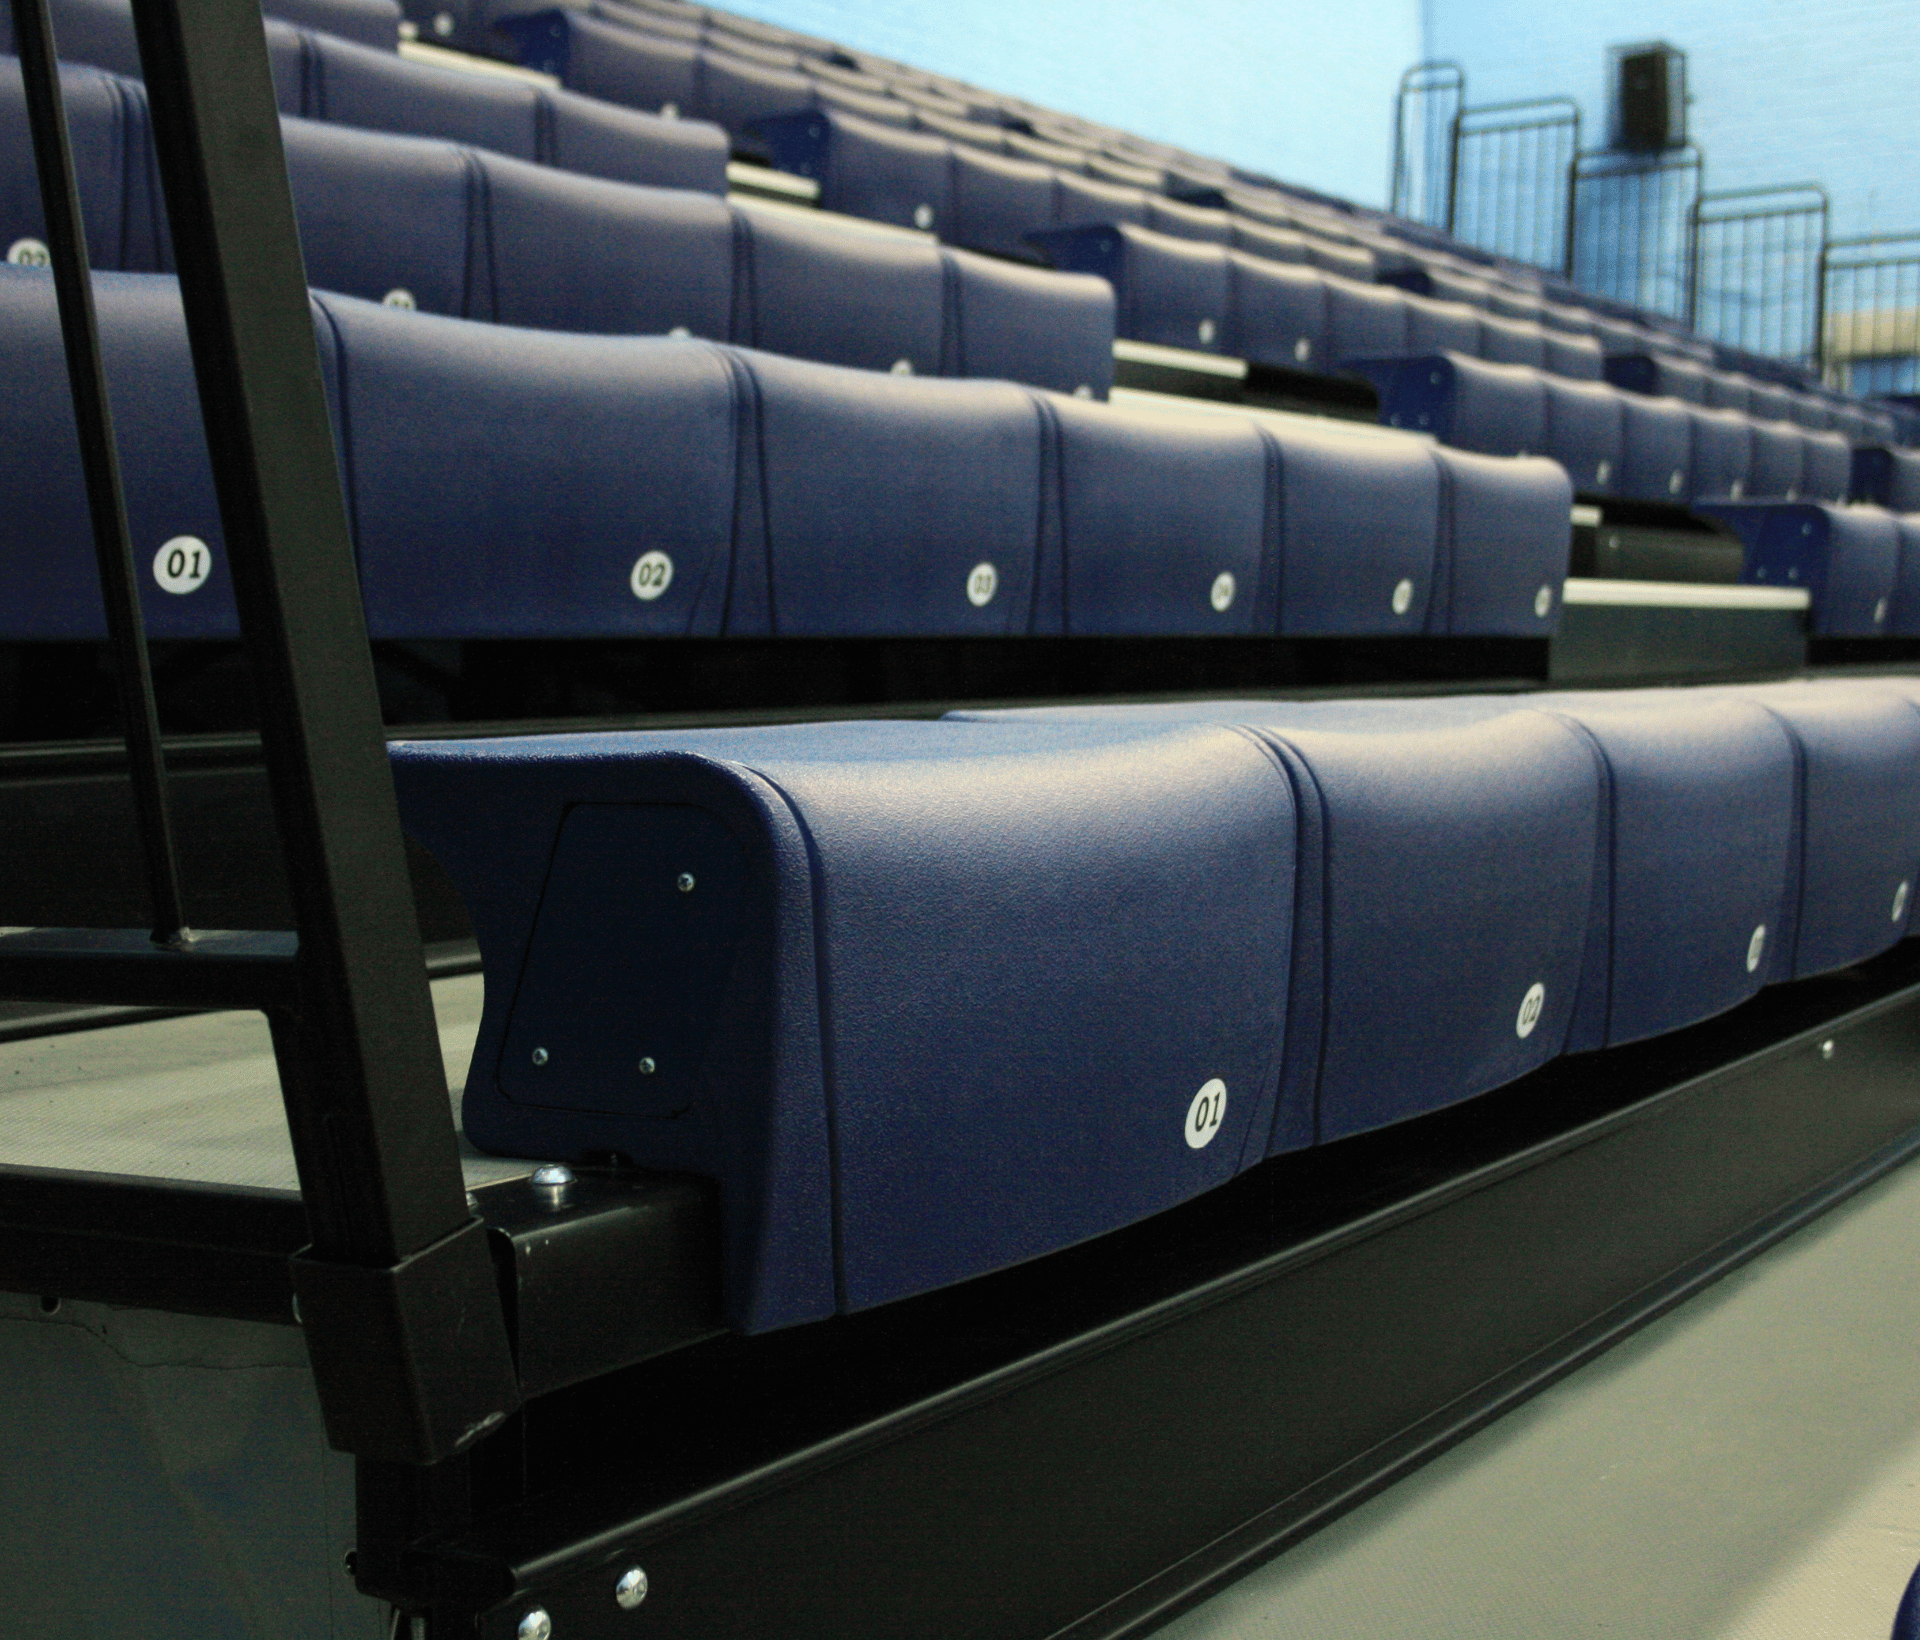 A row of seats in a stadium.